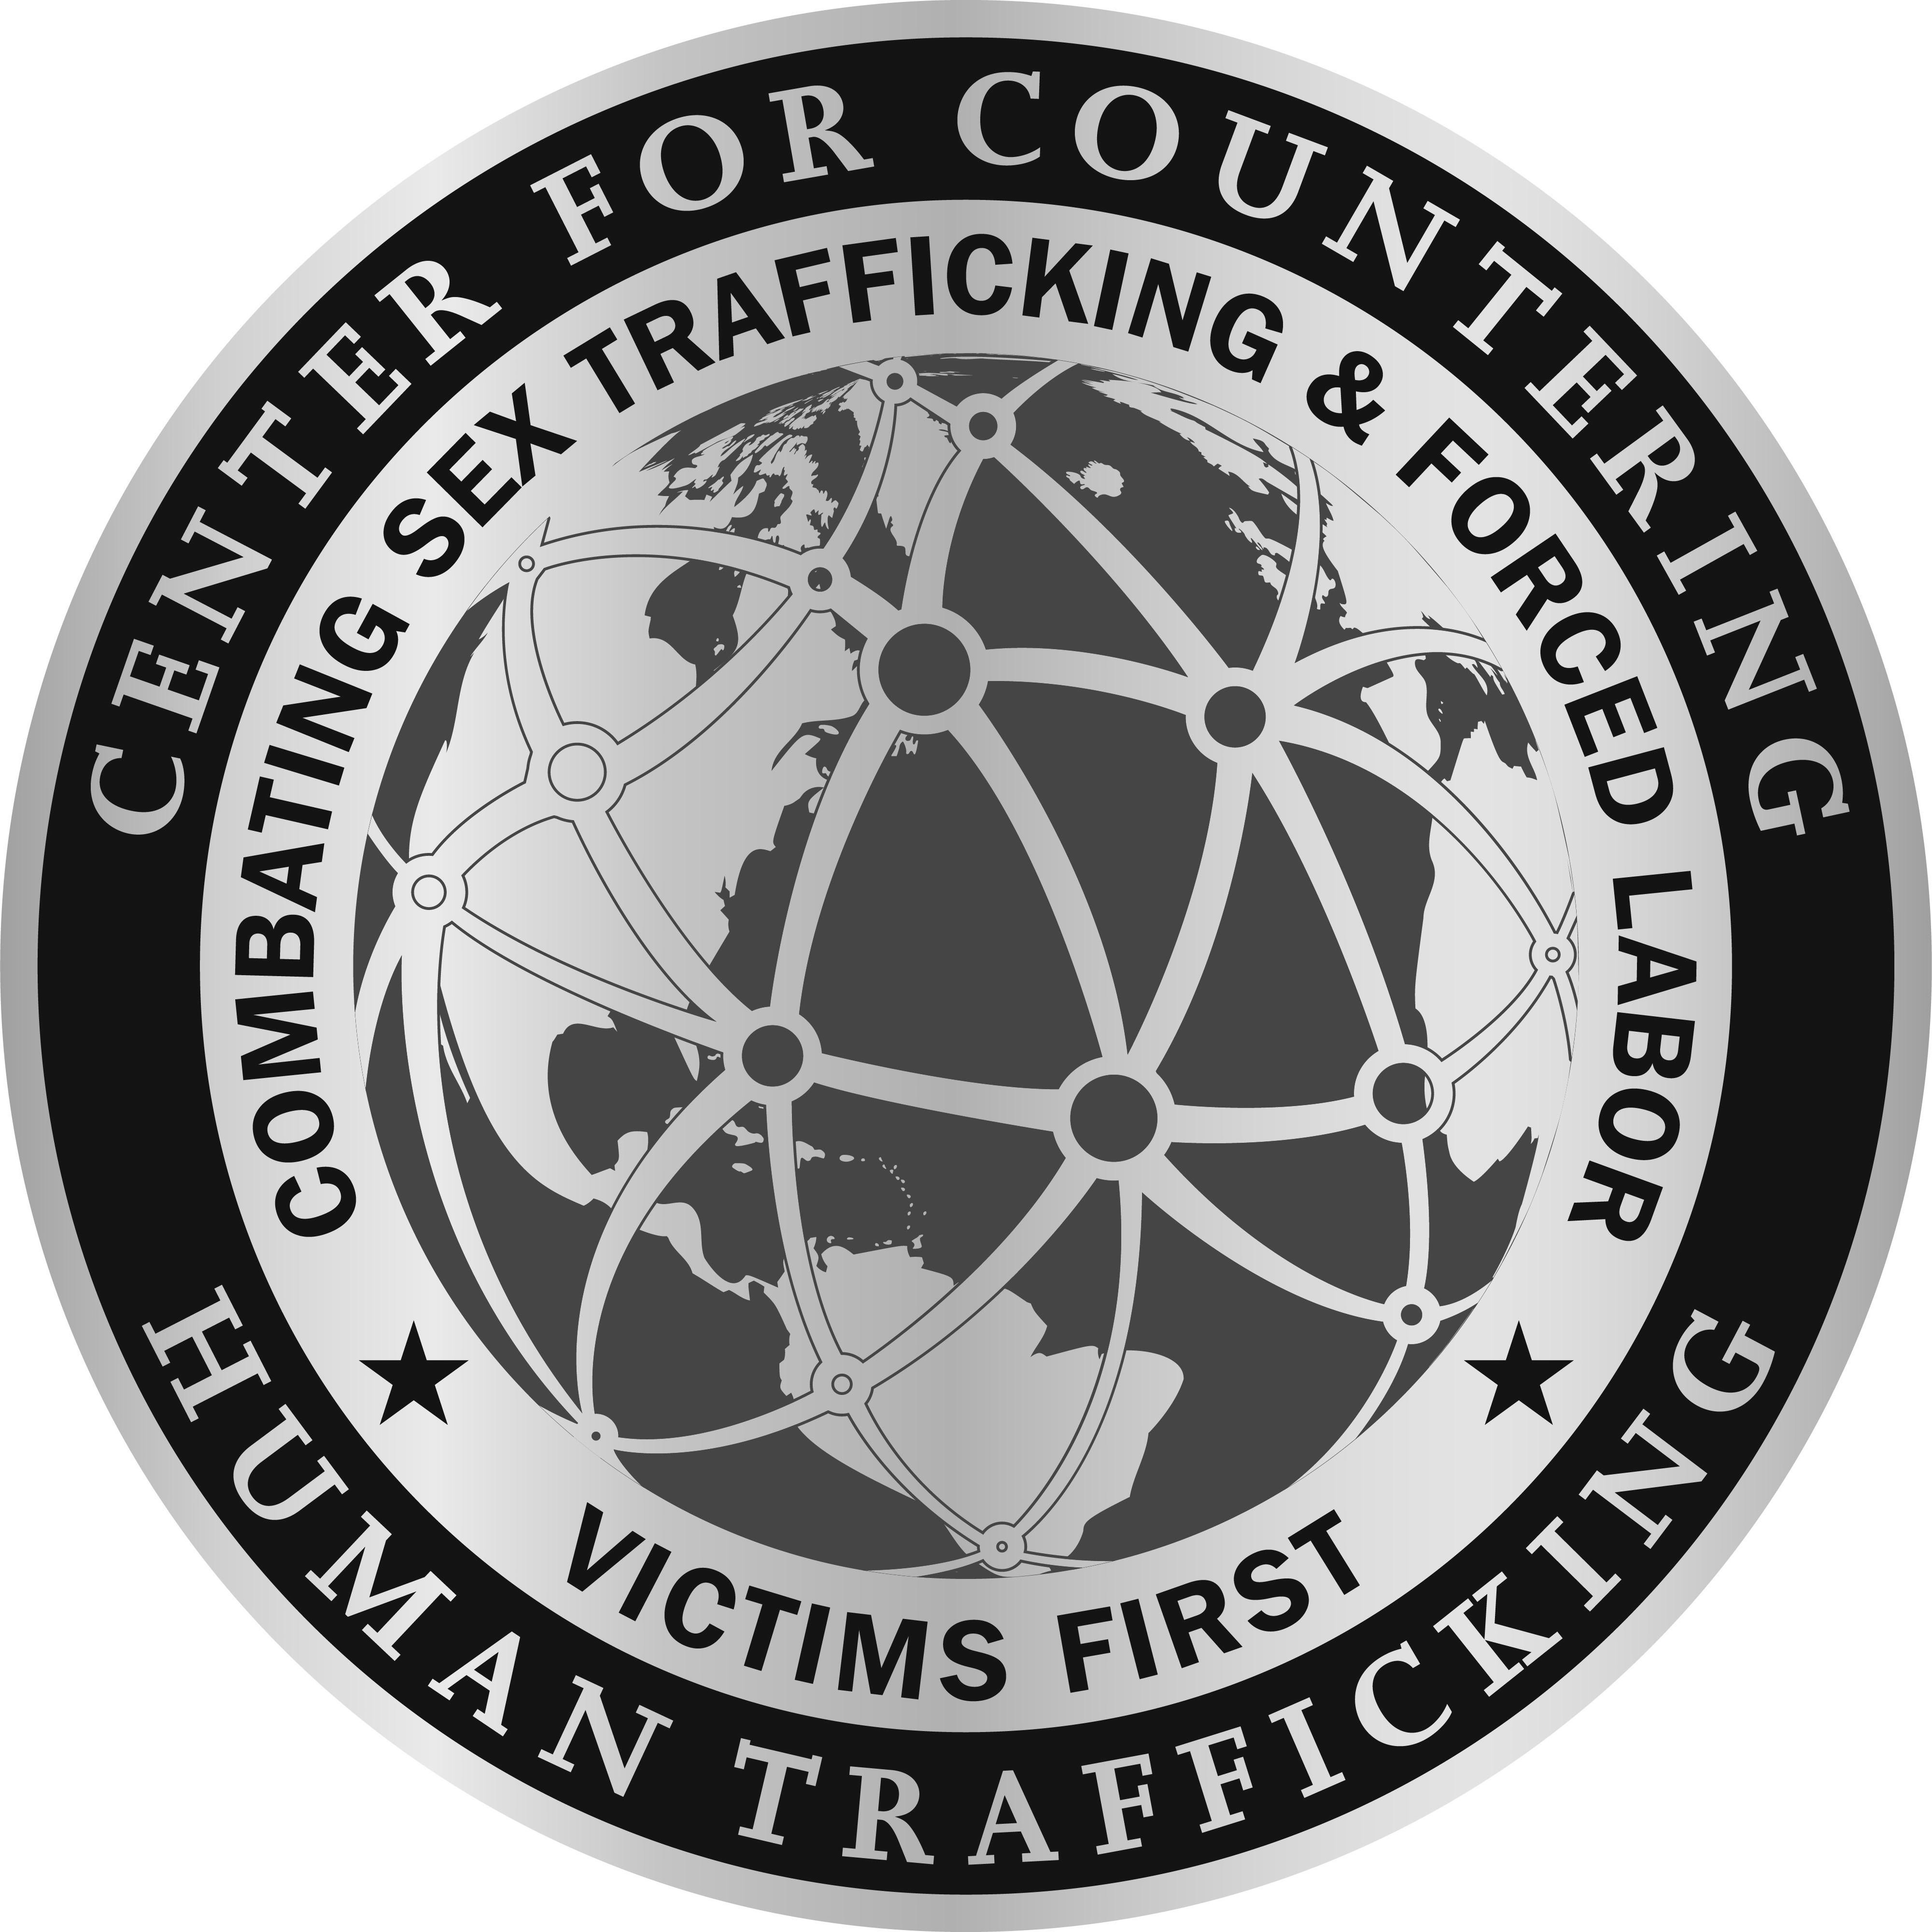  CENTER FOR COUNTERING HUMAN TRAFFICKING COMBATING SEX TRAFFICKING &amp; FORCED LABOR VICTIMS FIRST